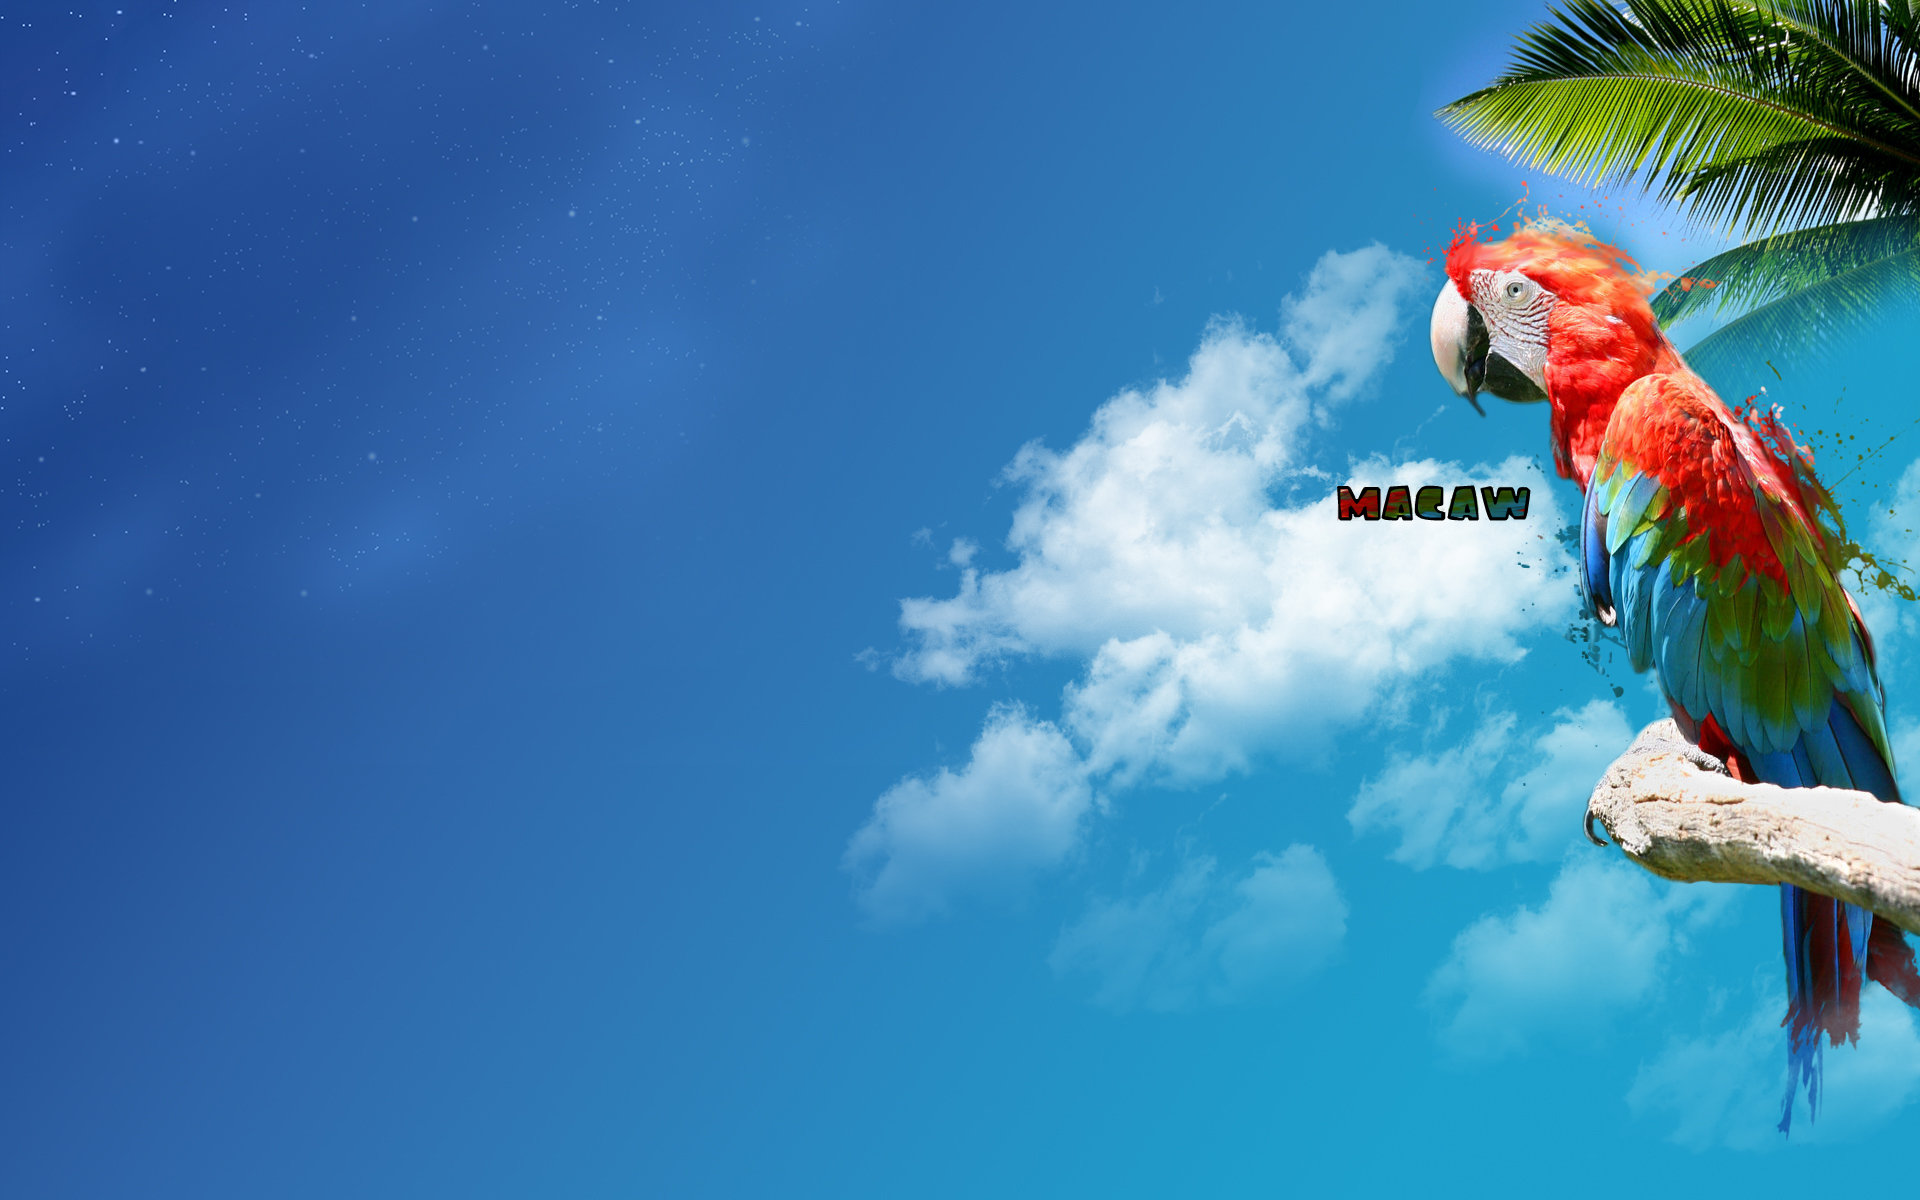 Macaw wallpaper by ReD1221 on